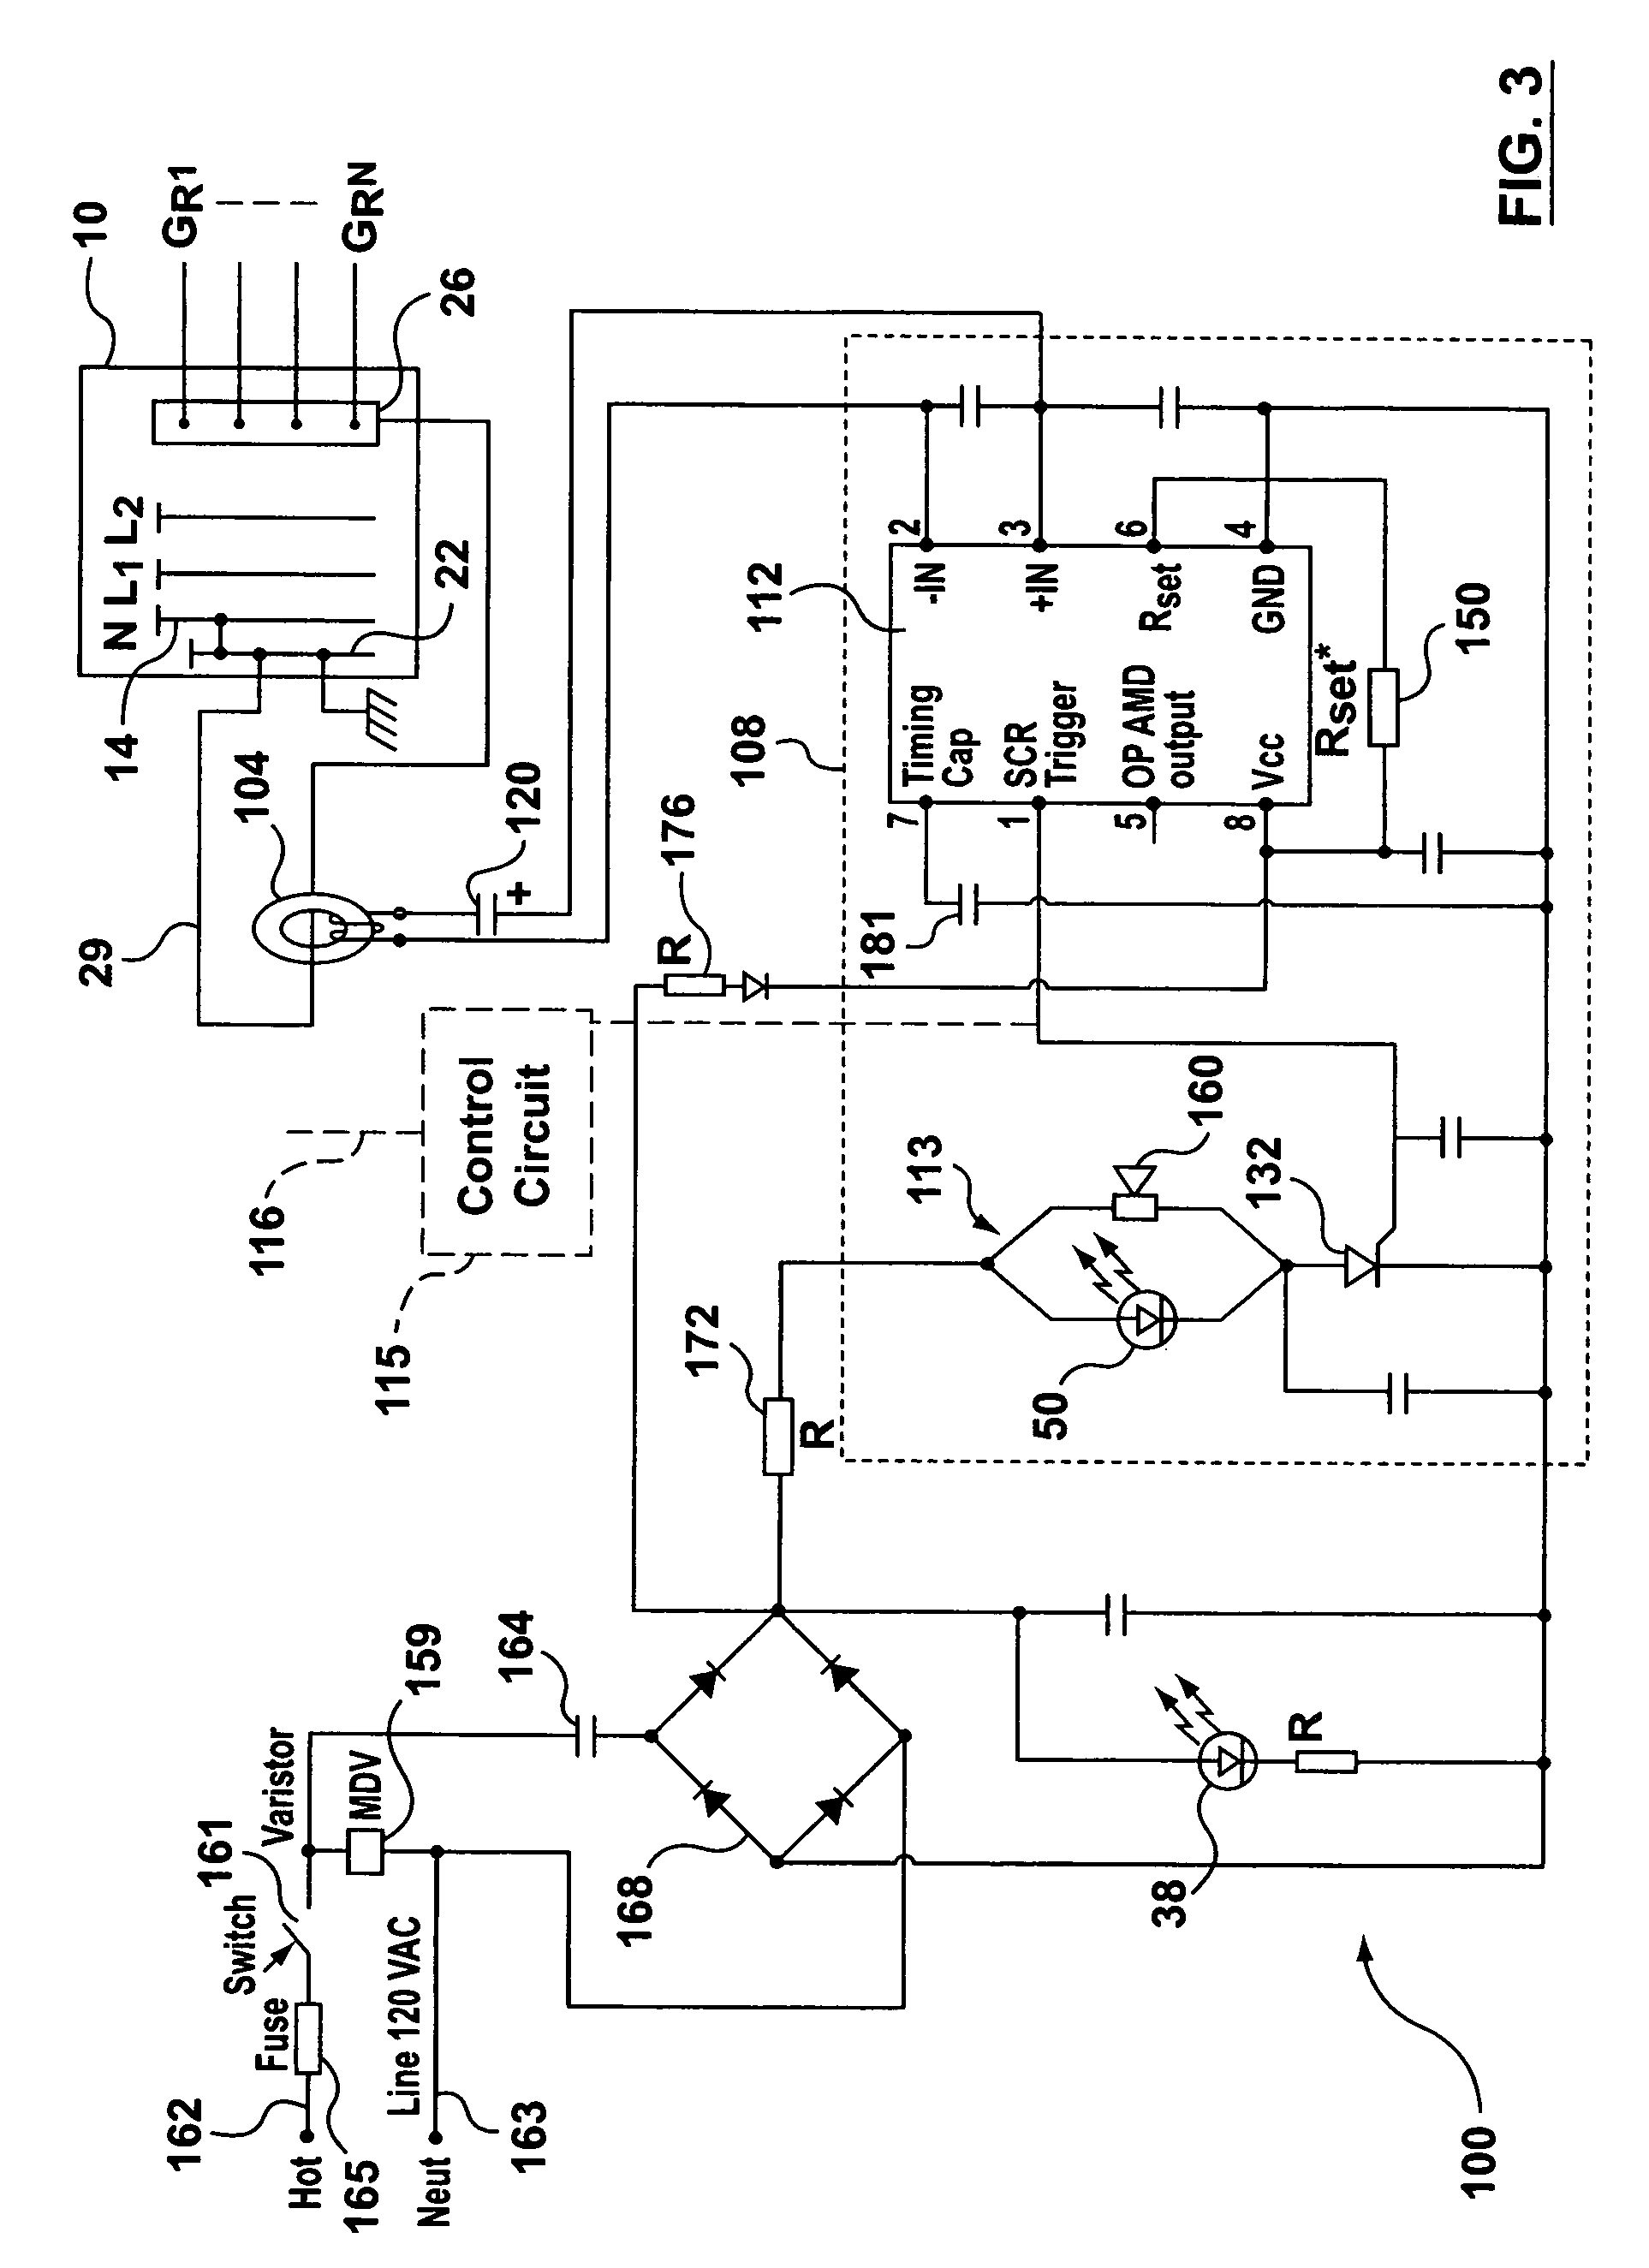 Ground-fault monitor for multiple circuits